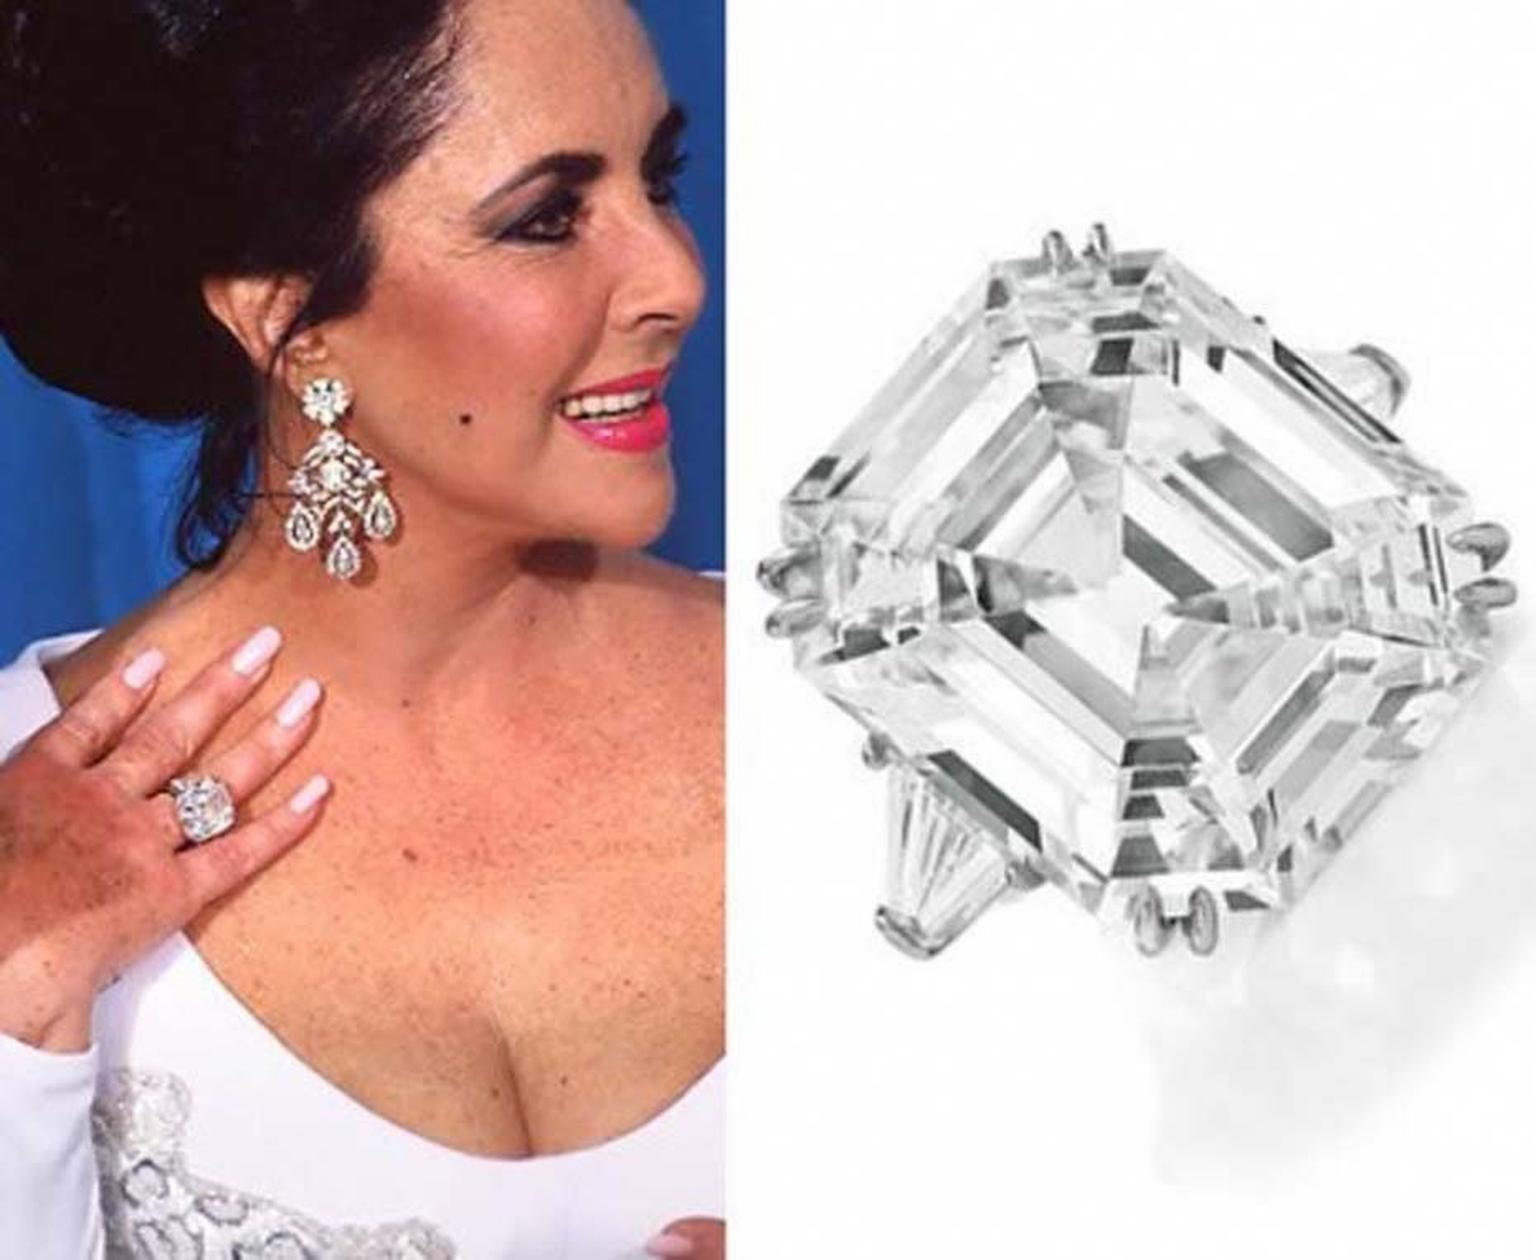 Richard Burton bought the most famous Asscher-cut diamond in history - the Krupp diamond - for Elizabeth Taylor in 1968, allegedly as a prize for beating him at table tennis.